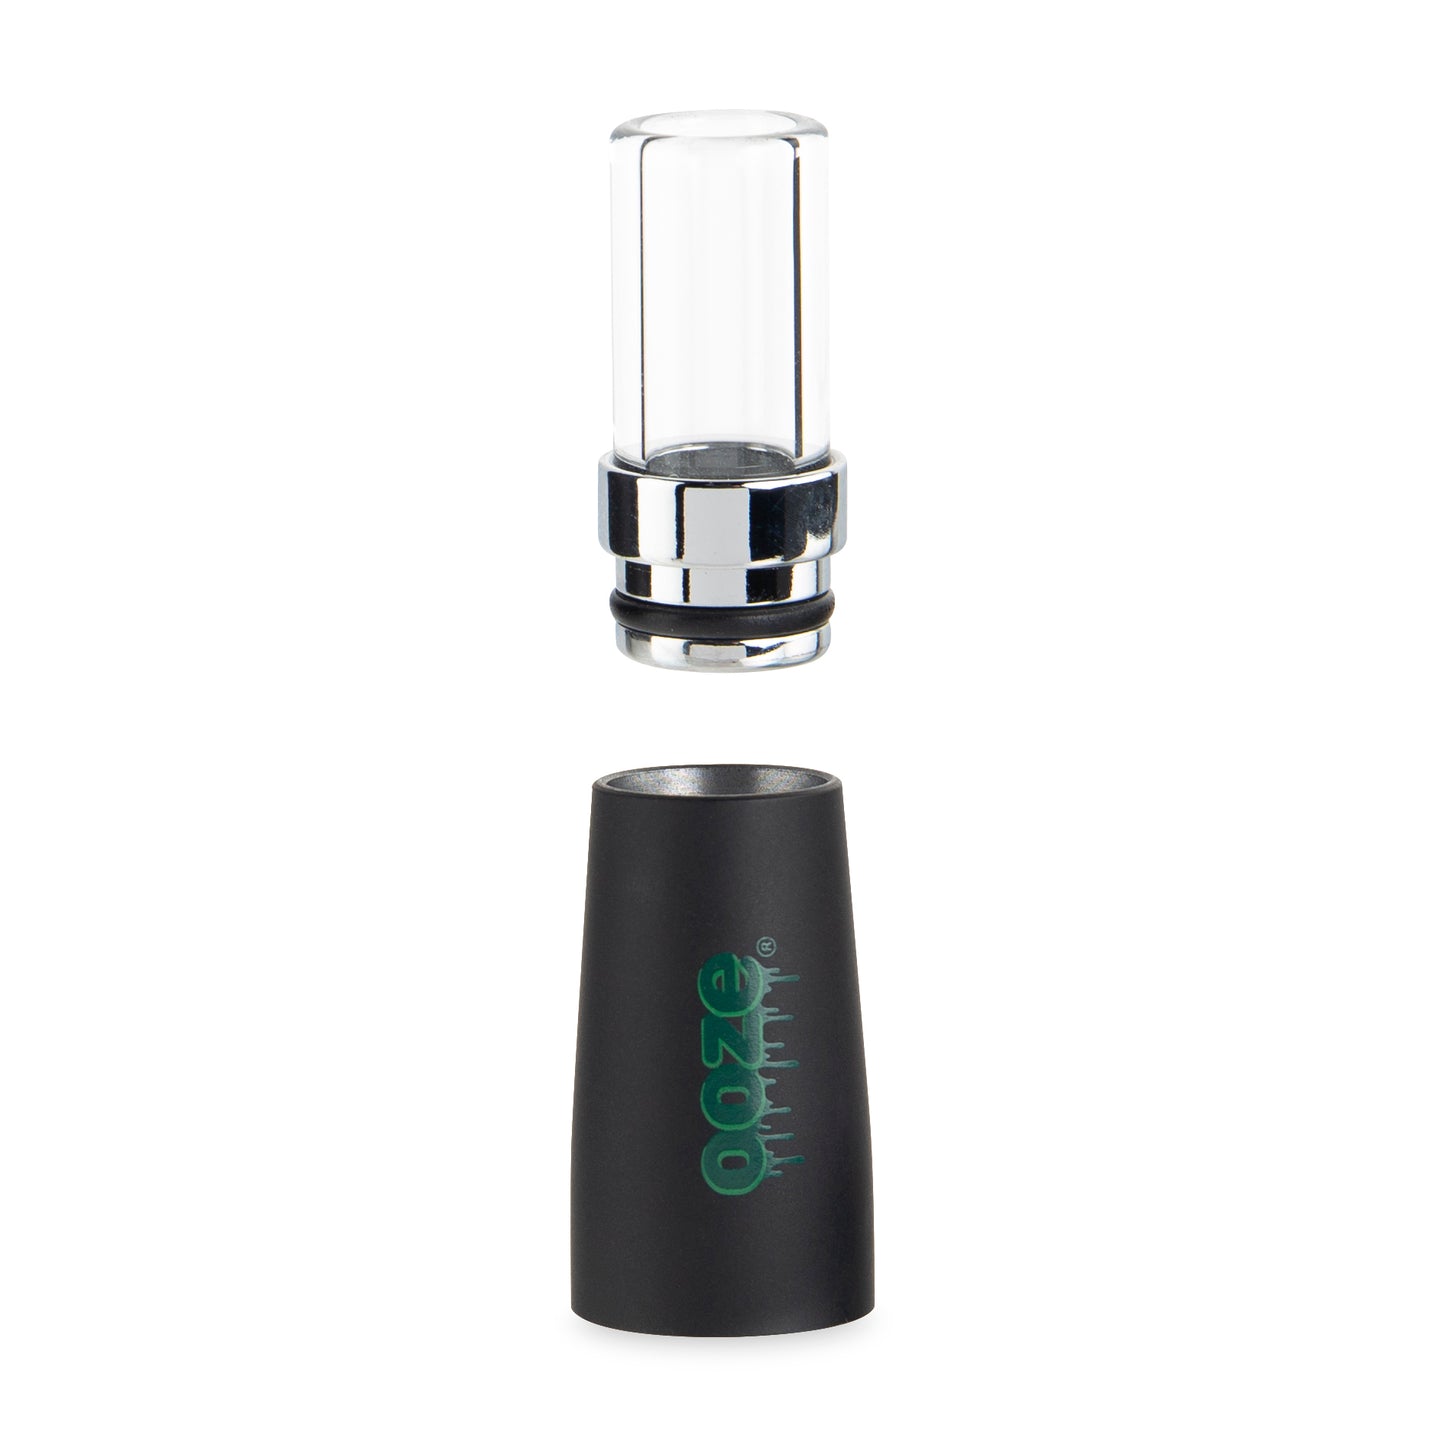 Ooze Fusion Vaporizer Replacement Atomizer 3-Pack + Mouthpiece - Panther Black